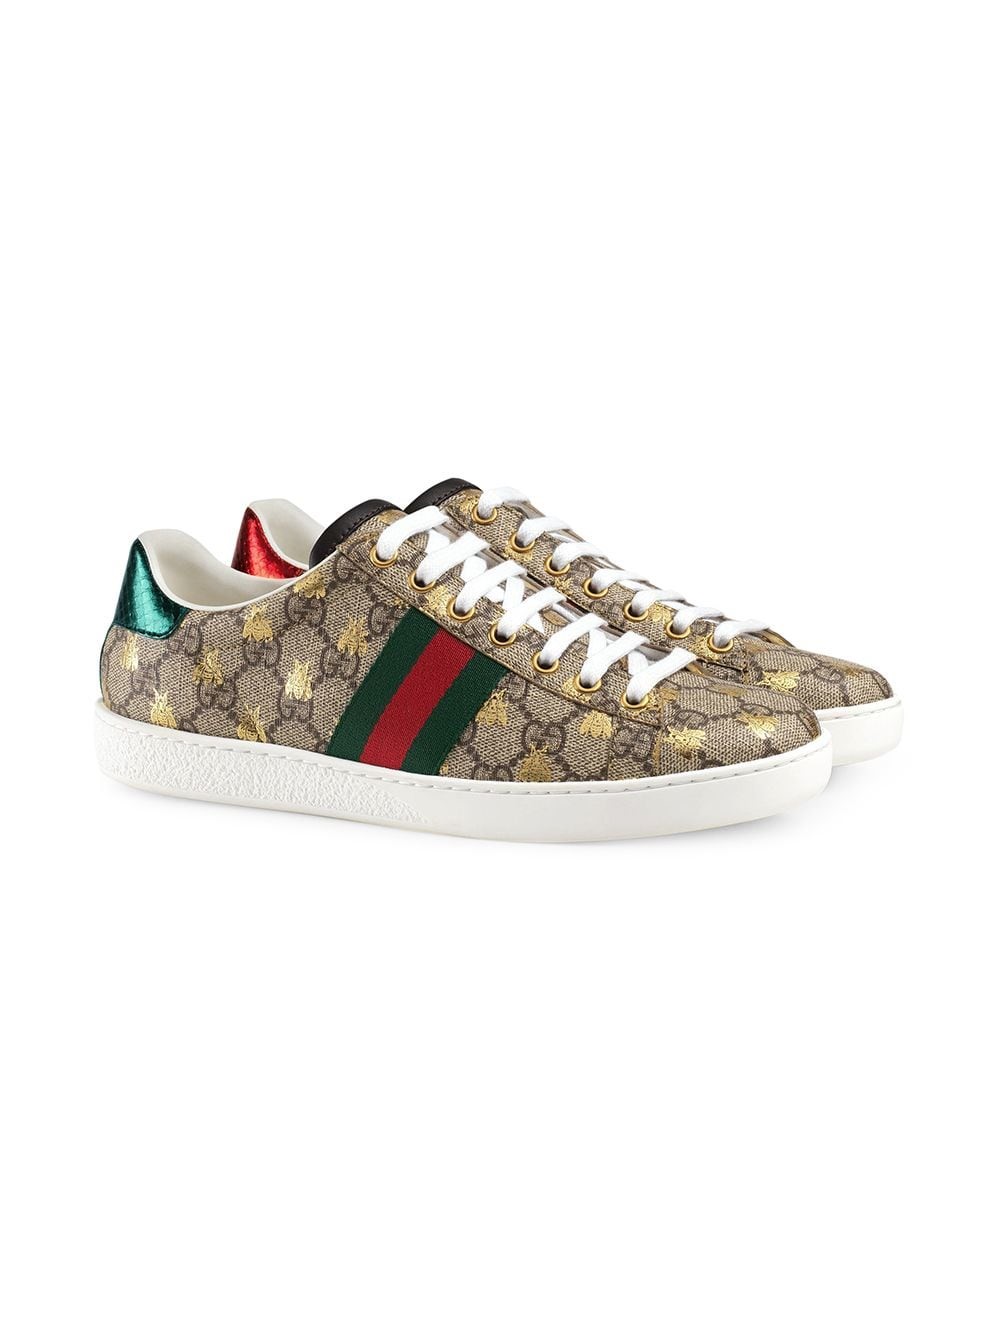 gucci GG PRINT EMBROIDERED BEE SNEAKERS available on montiboutique.com ...